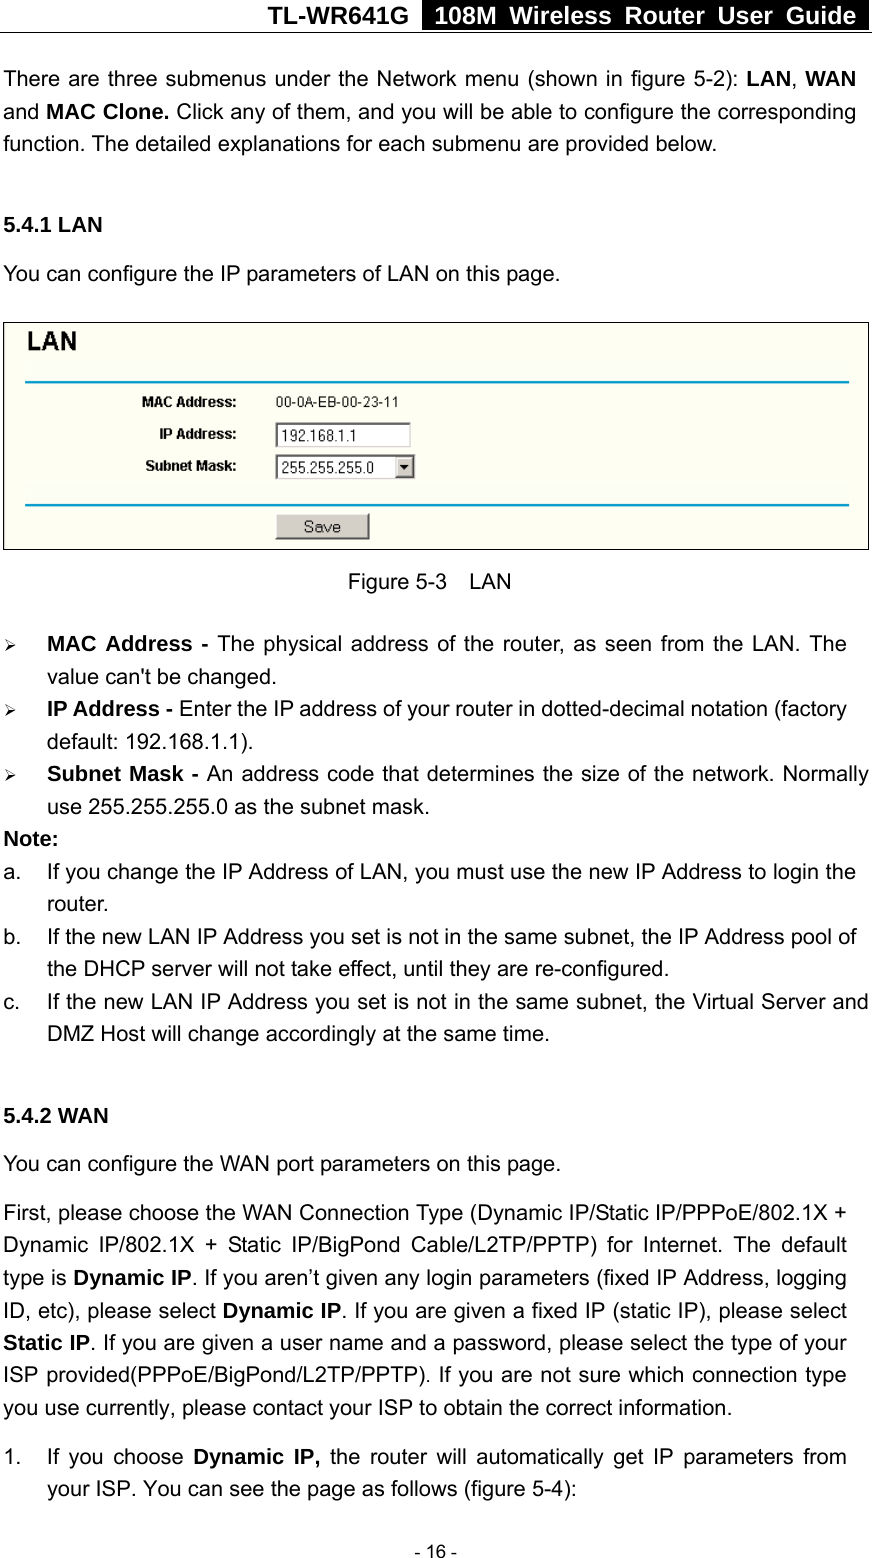 TL-WR641G   108M Wireless Router User Guide  There are three submenus under the Network menu (shown in figure 5-2): LAN, WAN and MAC Clone. Click any of them, and you will be able to configure the corresponding function. The detailed explanations for each submenu are provided below.  5.4.1 LAN You can configure the IP parameters of LAN on this page.    Figure 5-3  LAN ¾ MAC Address - The physical address of the router, as seen from the LAN. The value can&apos;t be changed. ¾ IP Address - Enter the IP address of your router in dotted-decimal notation (factory default: 192.168.1.1). ¾ Subnet Mask - An address code that determines the size of the network. Normally use 255.255.255.0 as the subnet mask.   Note:  a.  If you change the IP Address of LAN, you must use the new IP Address to login the router.  b.  If the new LAN IP Address you set is not in the same subnet, the IP Address pool of the DHCP server will not take effect, until they are re-configured. c.  If the new LAN IP Address you set is not in the same subnet, the Virtual Server and DMZ Host will change accordingly at the same time.  5.4.2 WAN You can configure the WAN port parameters on this page. First, please choose the WAN Connection Type (Dynamic IP/Static IP/PPPoE/802.1X + Dynamic IP/802.1X + Static IP/BigPond Cable/L2TP/PPTP) for Internet. The default type is Dynamic IP. If you aren’t given any login parameters (fixed IP Address, logging ID, etc), please select Dynamic IP. If you are given a fixed IP (static IP), please select Static IP. If you are given a user name and a password, please select the type of your ISP provided(PPPoE/BigPond/L2TP/PPTP). If you are not sure which connection type you use currently, please contact your ISP to obtain the correct information. 1. If you choose Dynamic IP, the router will automatically get IP parameters from your ISP. You can see the page as follows (figure 5-4):  - 16 - 